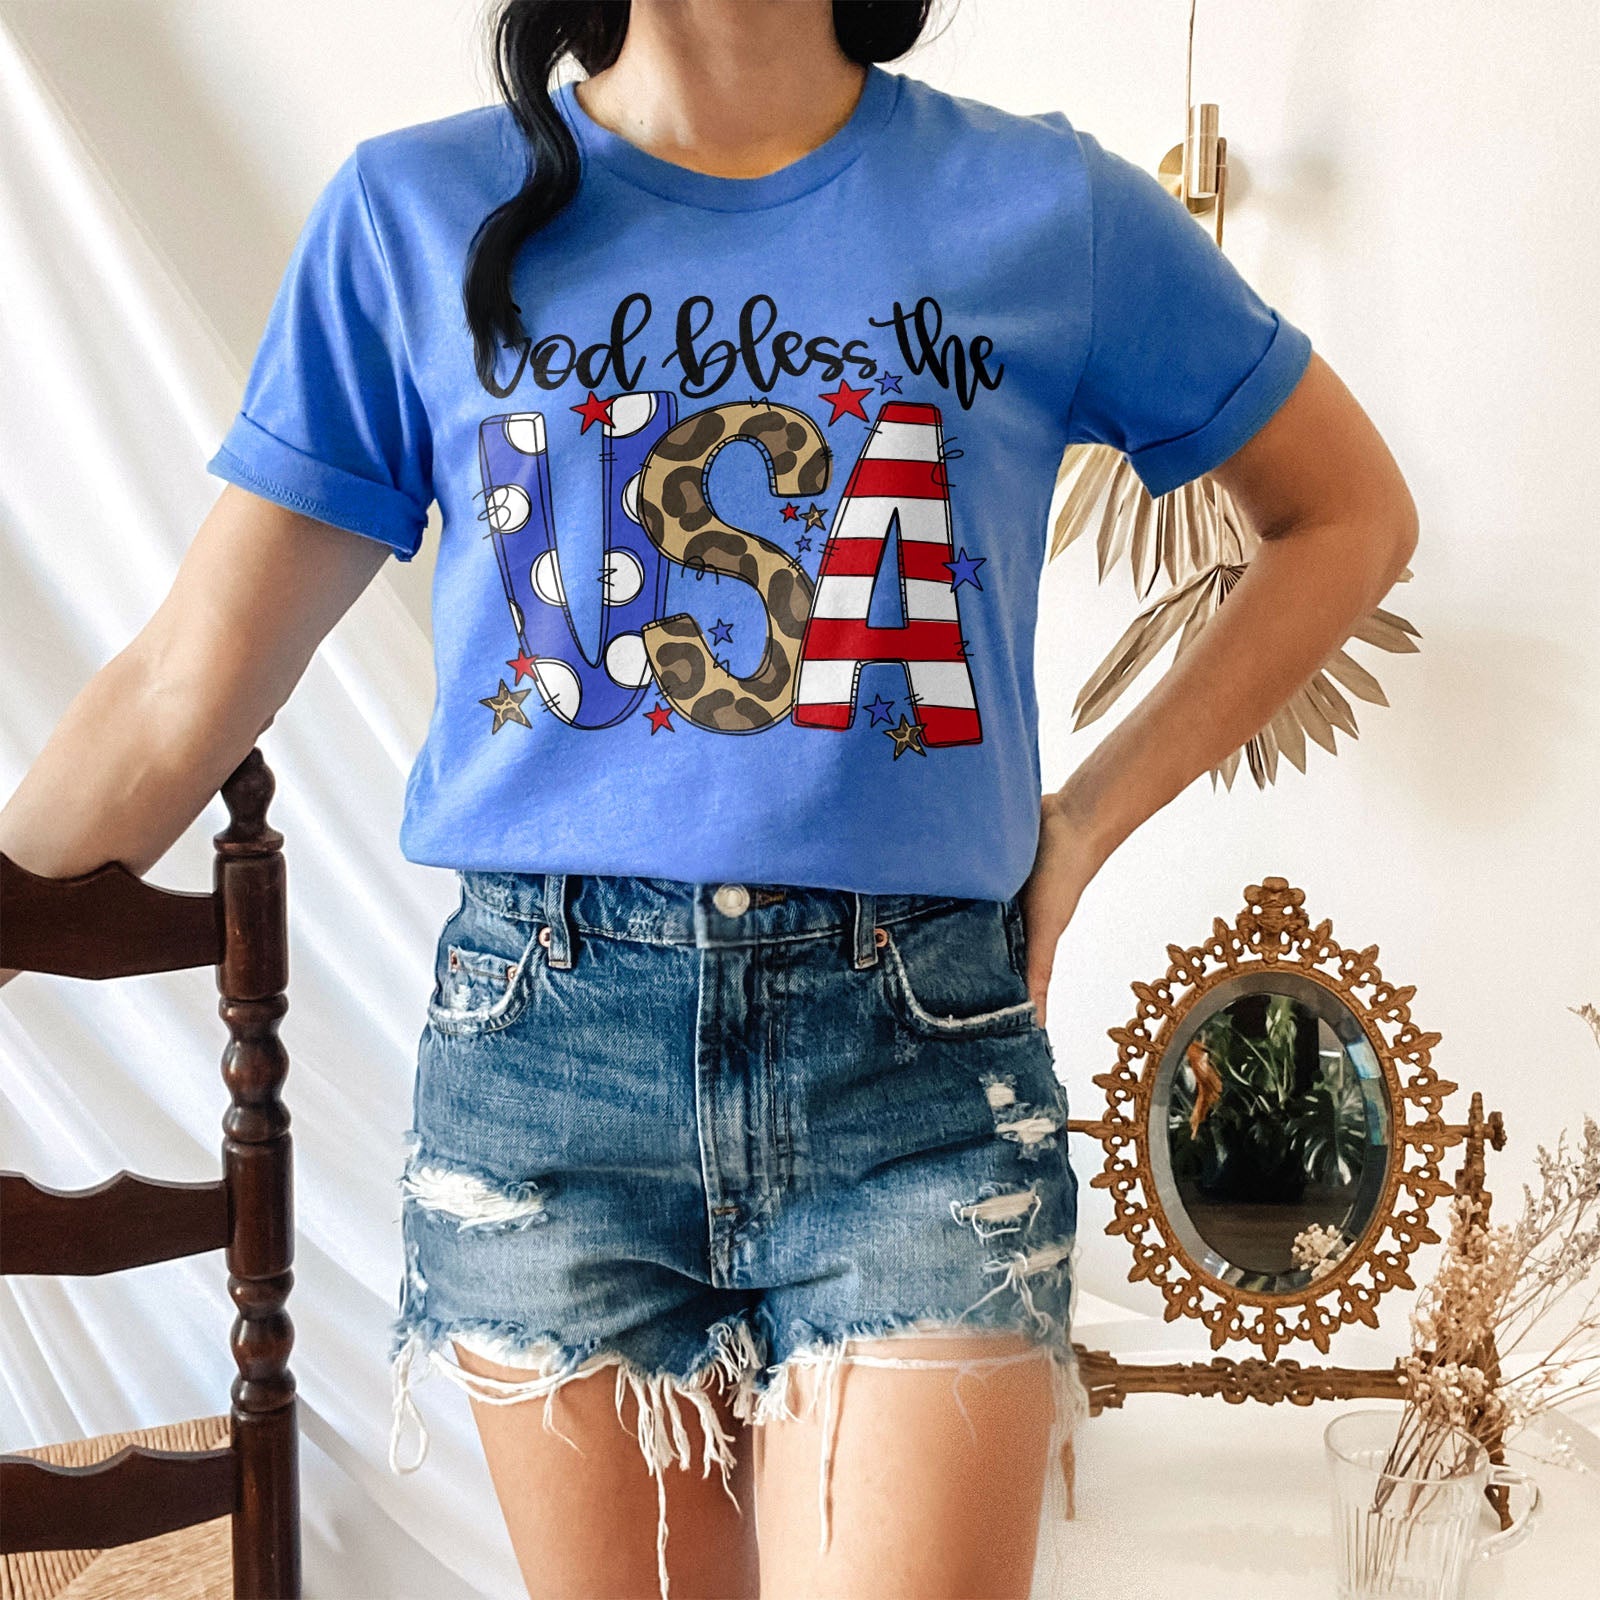 God Bless The USA Tee Shirts For Women - Christian Shirts for Women - Religious Tee Shirts